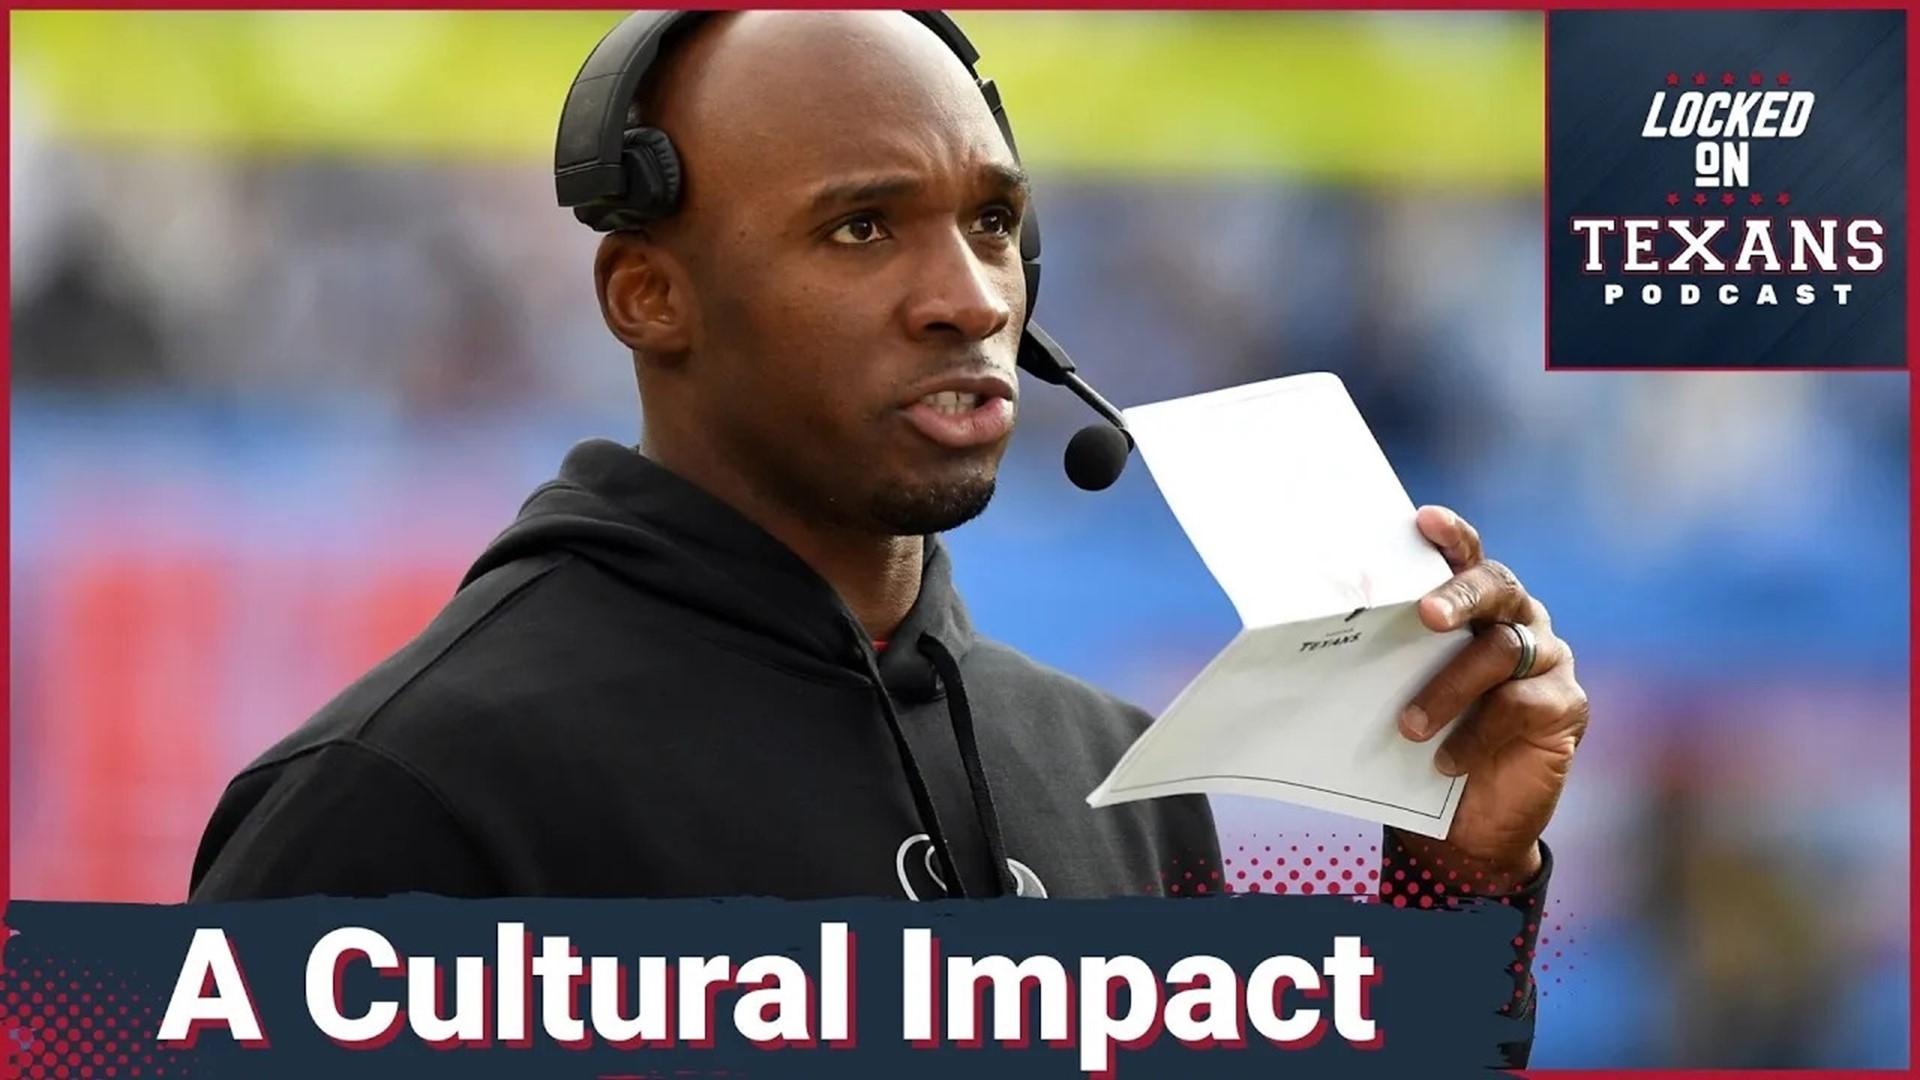 SportsTalk 790's Stan Norfleet joins the show to discuss how coach DeMeco Ryans' cultural impact made the Houston Texans a prime destination for players.